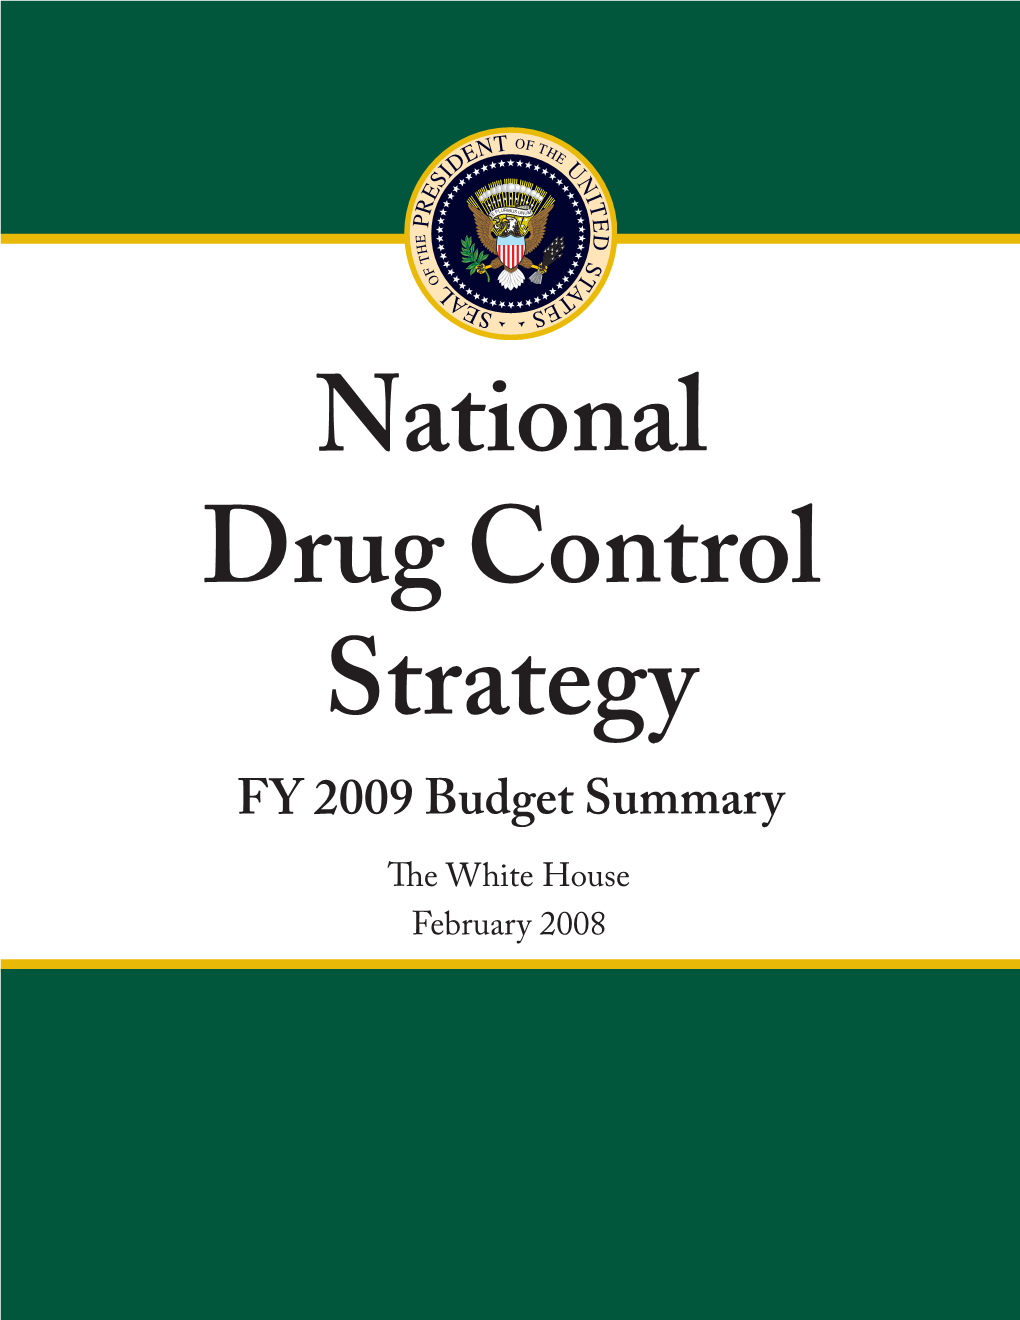 National Drug Control Strategy, FY 2009 Budget Summary Table of Contents